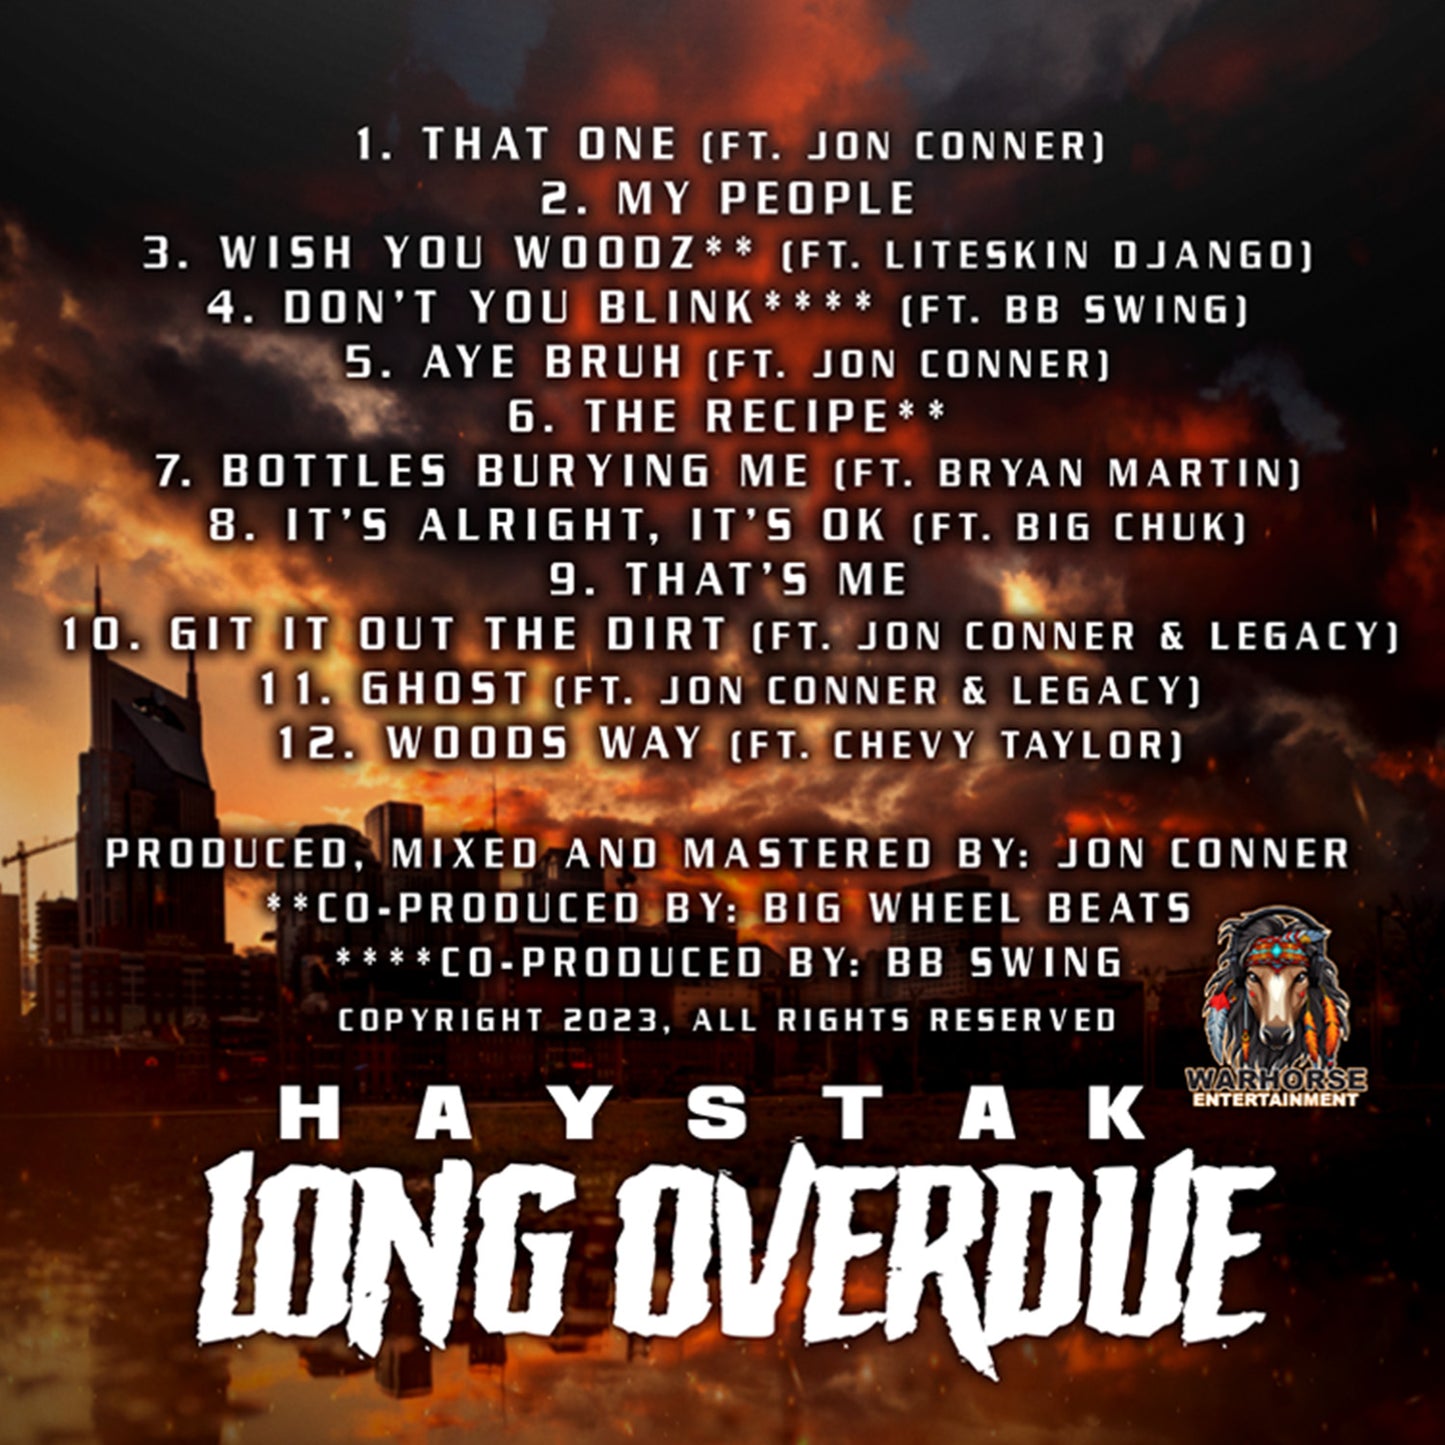 Haystak - "Long Overdue" (Limited Edition CD) *BLACK FRIDAY SALE*